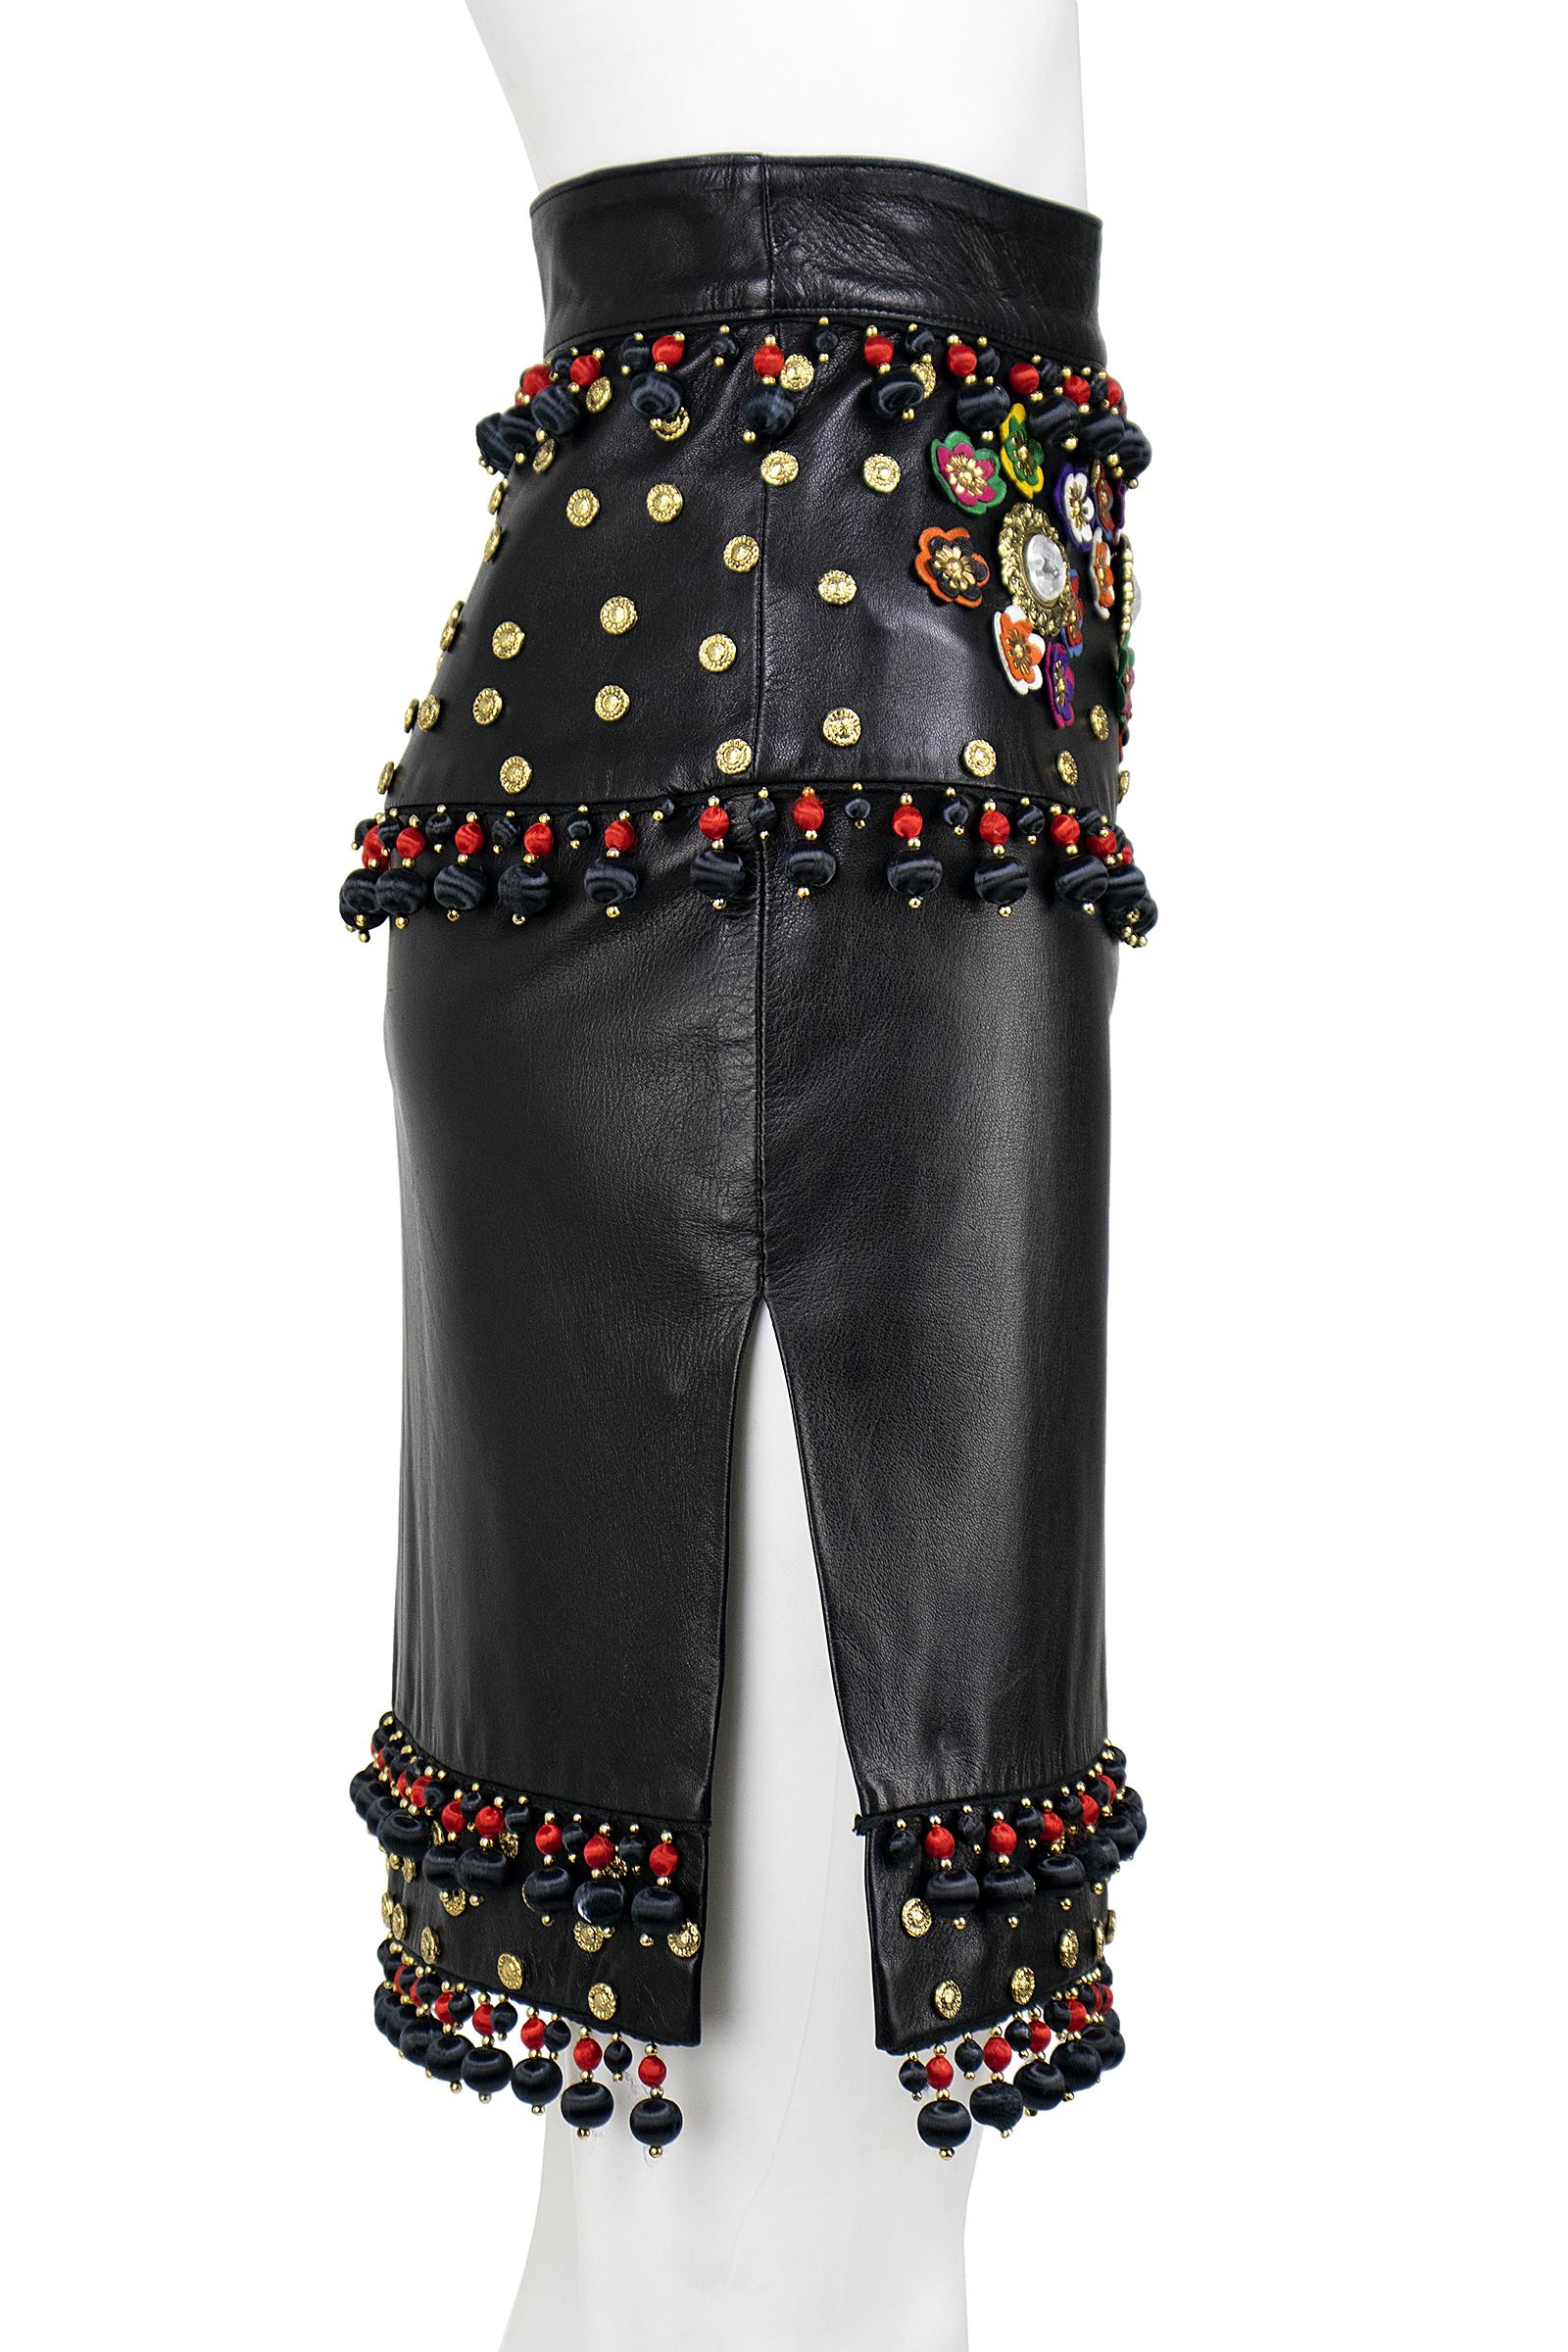 Moschino Circa 1990s Black Leather Skirt with Tassels, Metal Studs and Flowers For Sale 2